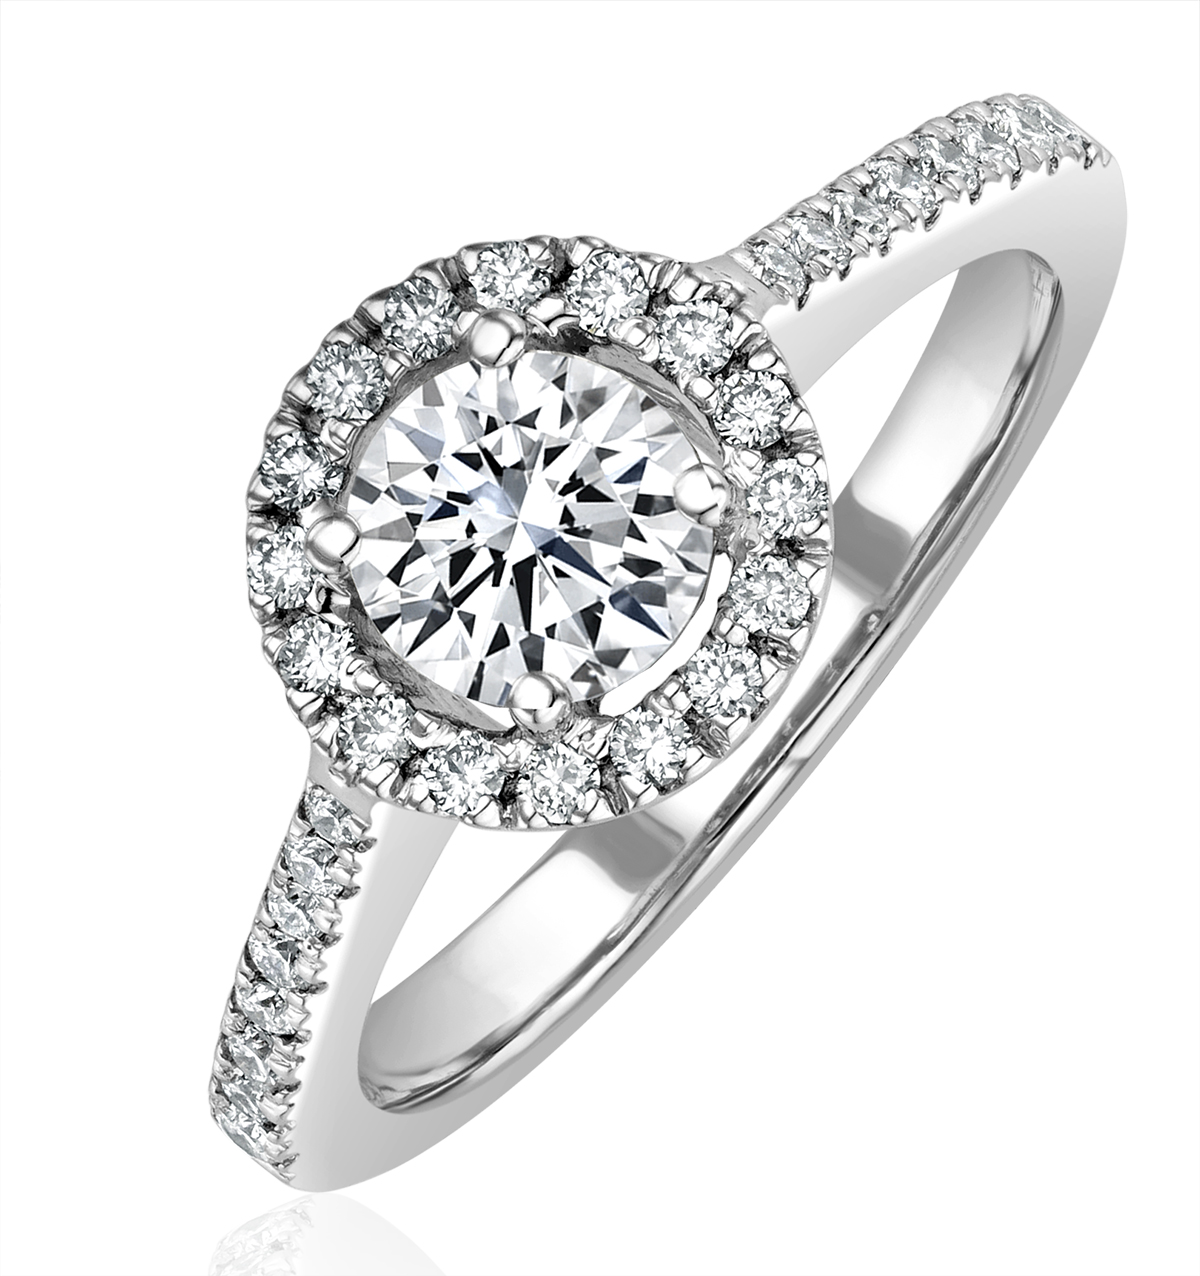 Certified 2.60Ct Round White Diamond Halo Antique Engagement Ring 14k White Gold 